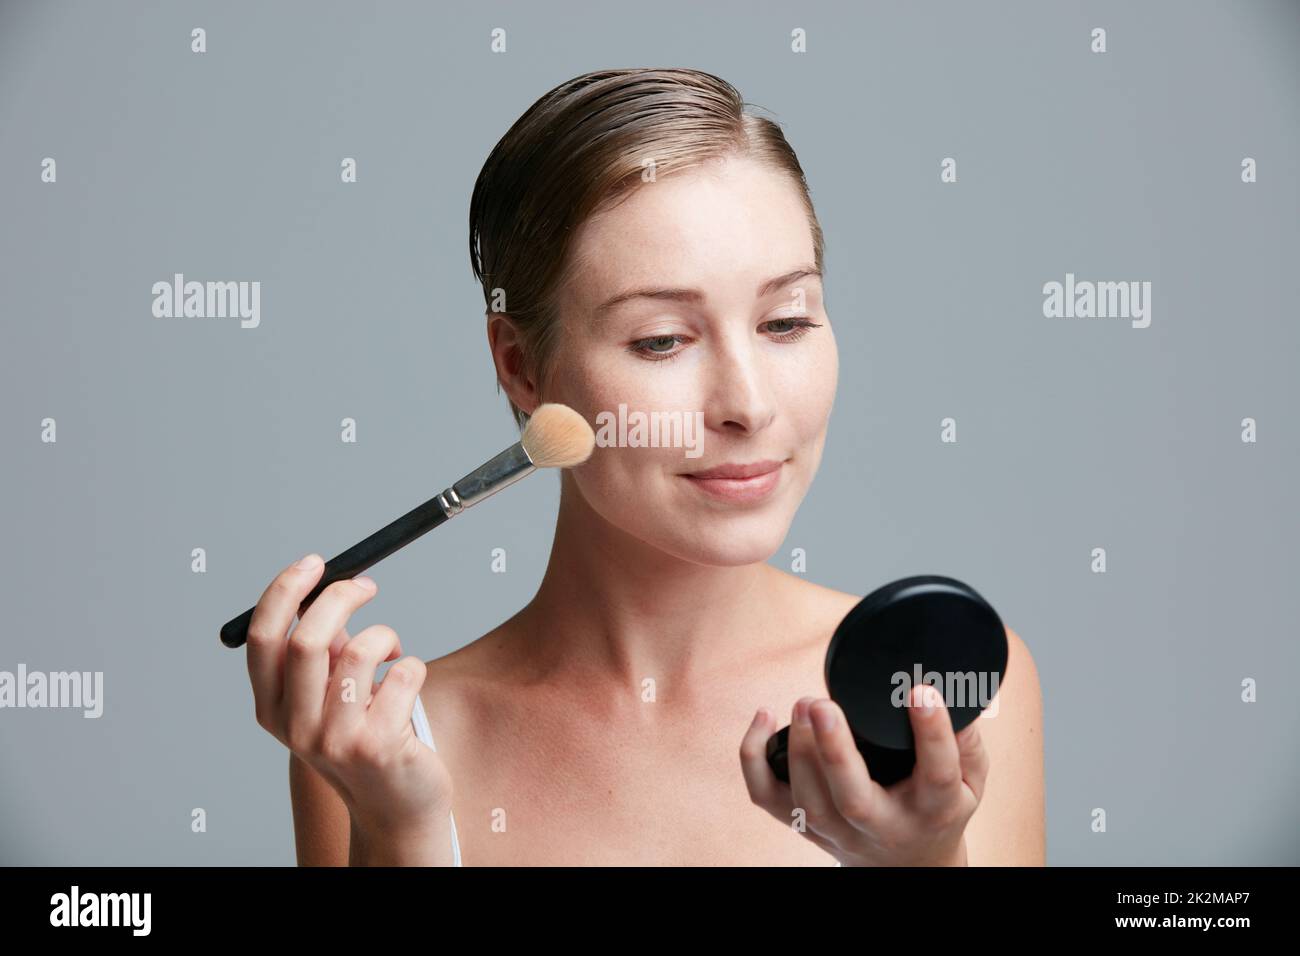 Look your best, let life take care of the rest. Studio shot of an attractive young woman applying makeup with a brush against a gray background. Stock Photo